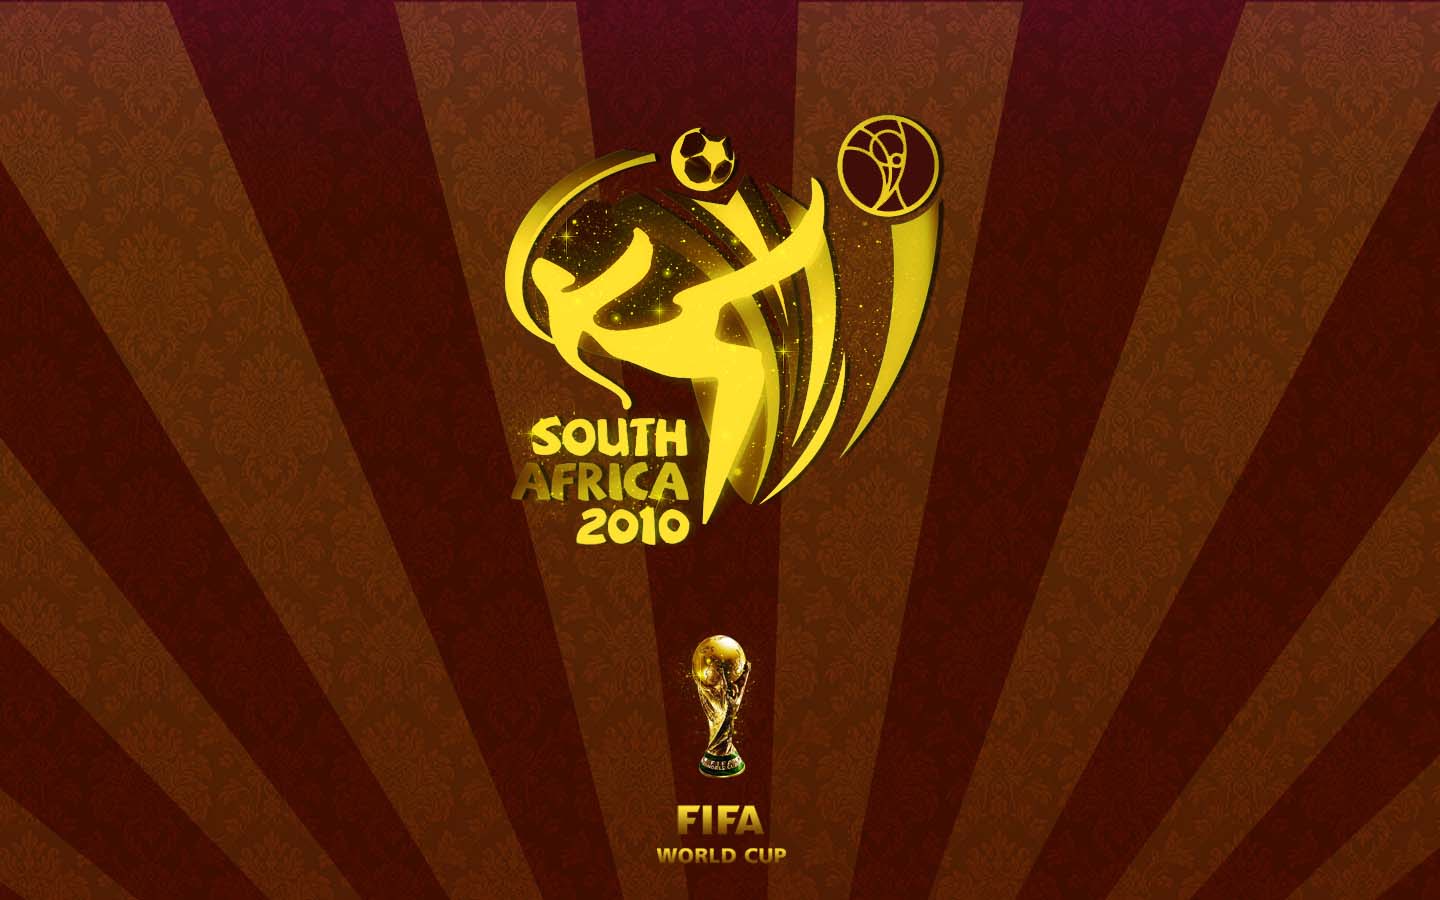 Fifa World Cup 2014 Wallpapers and Windows Theme from Geekiest